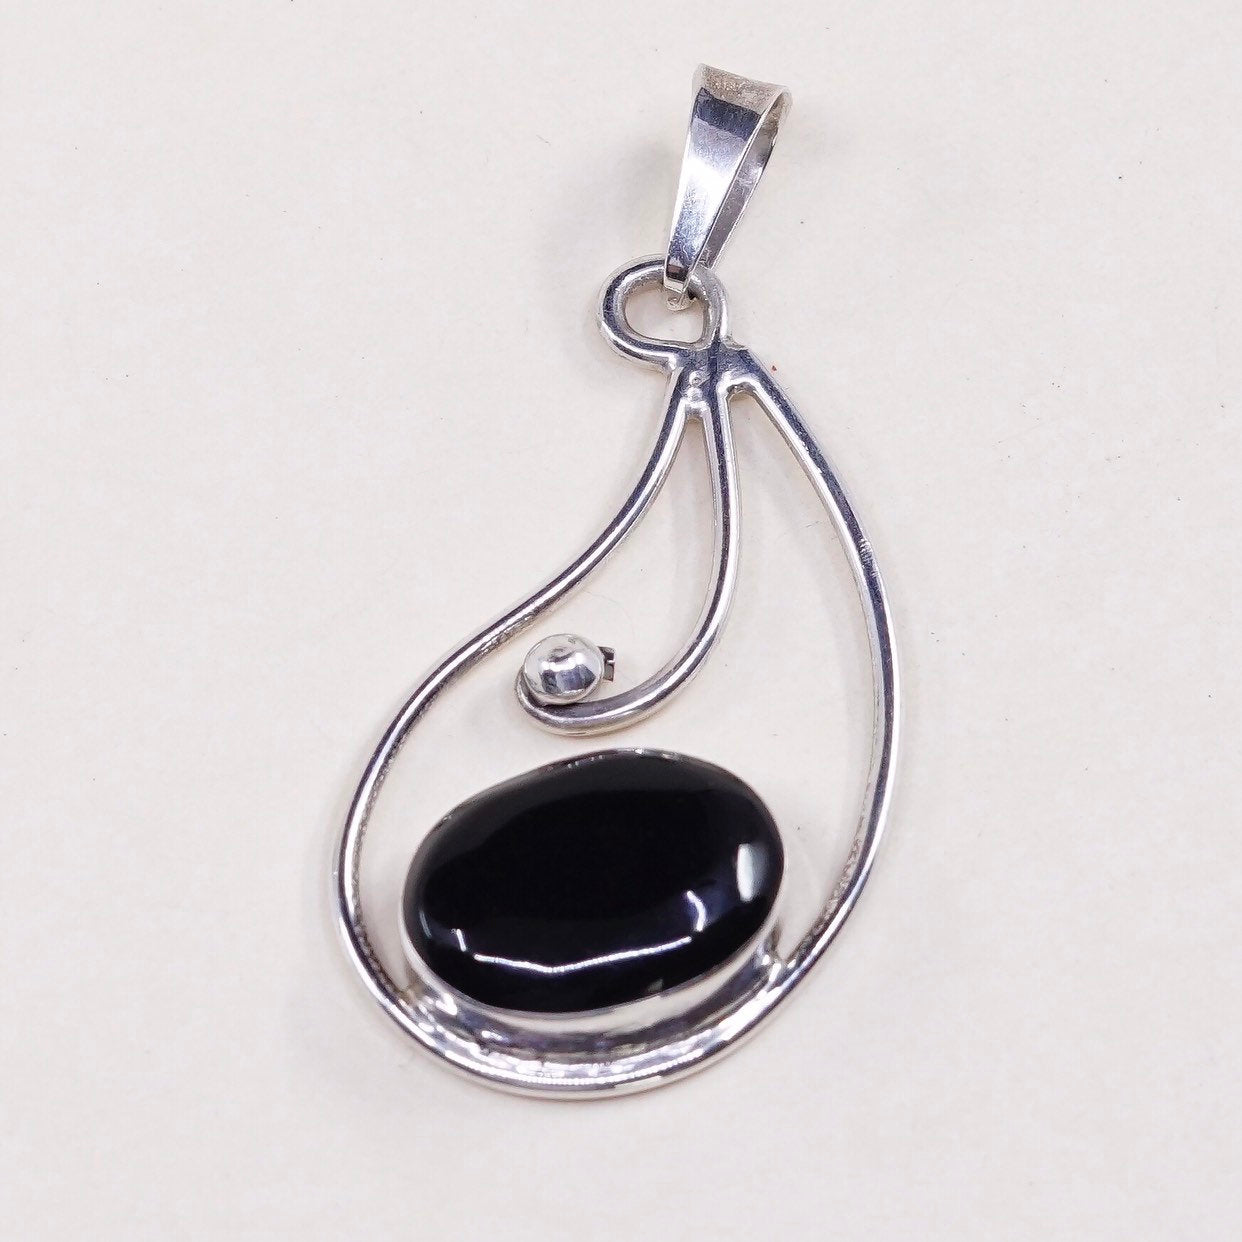 VTG mexico handmade sterling silver pendant, Mexico 925 with oval black obsidian